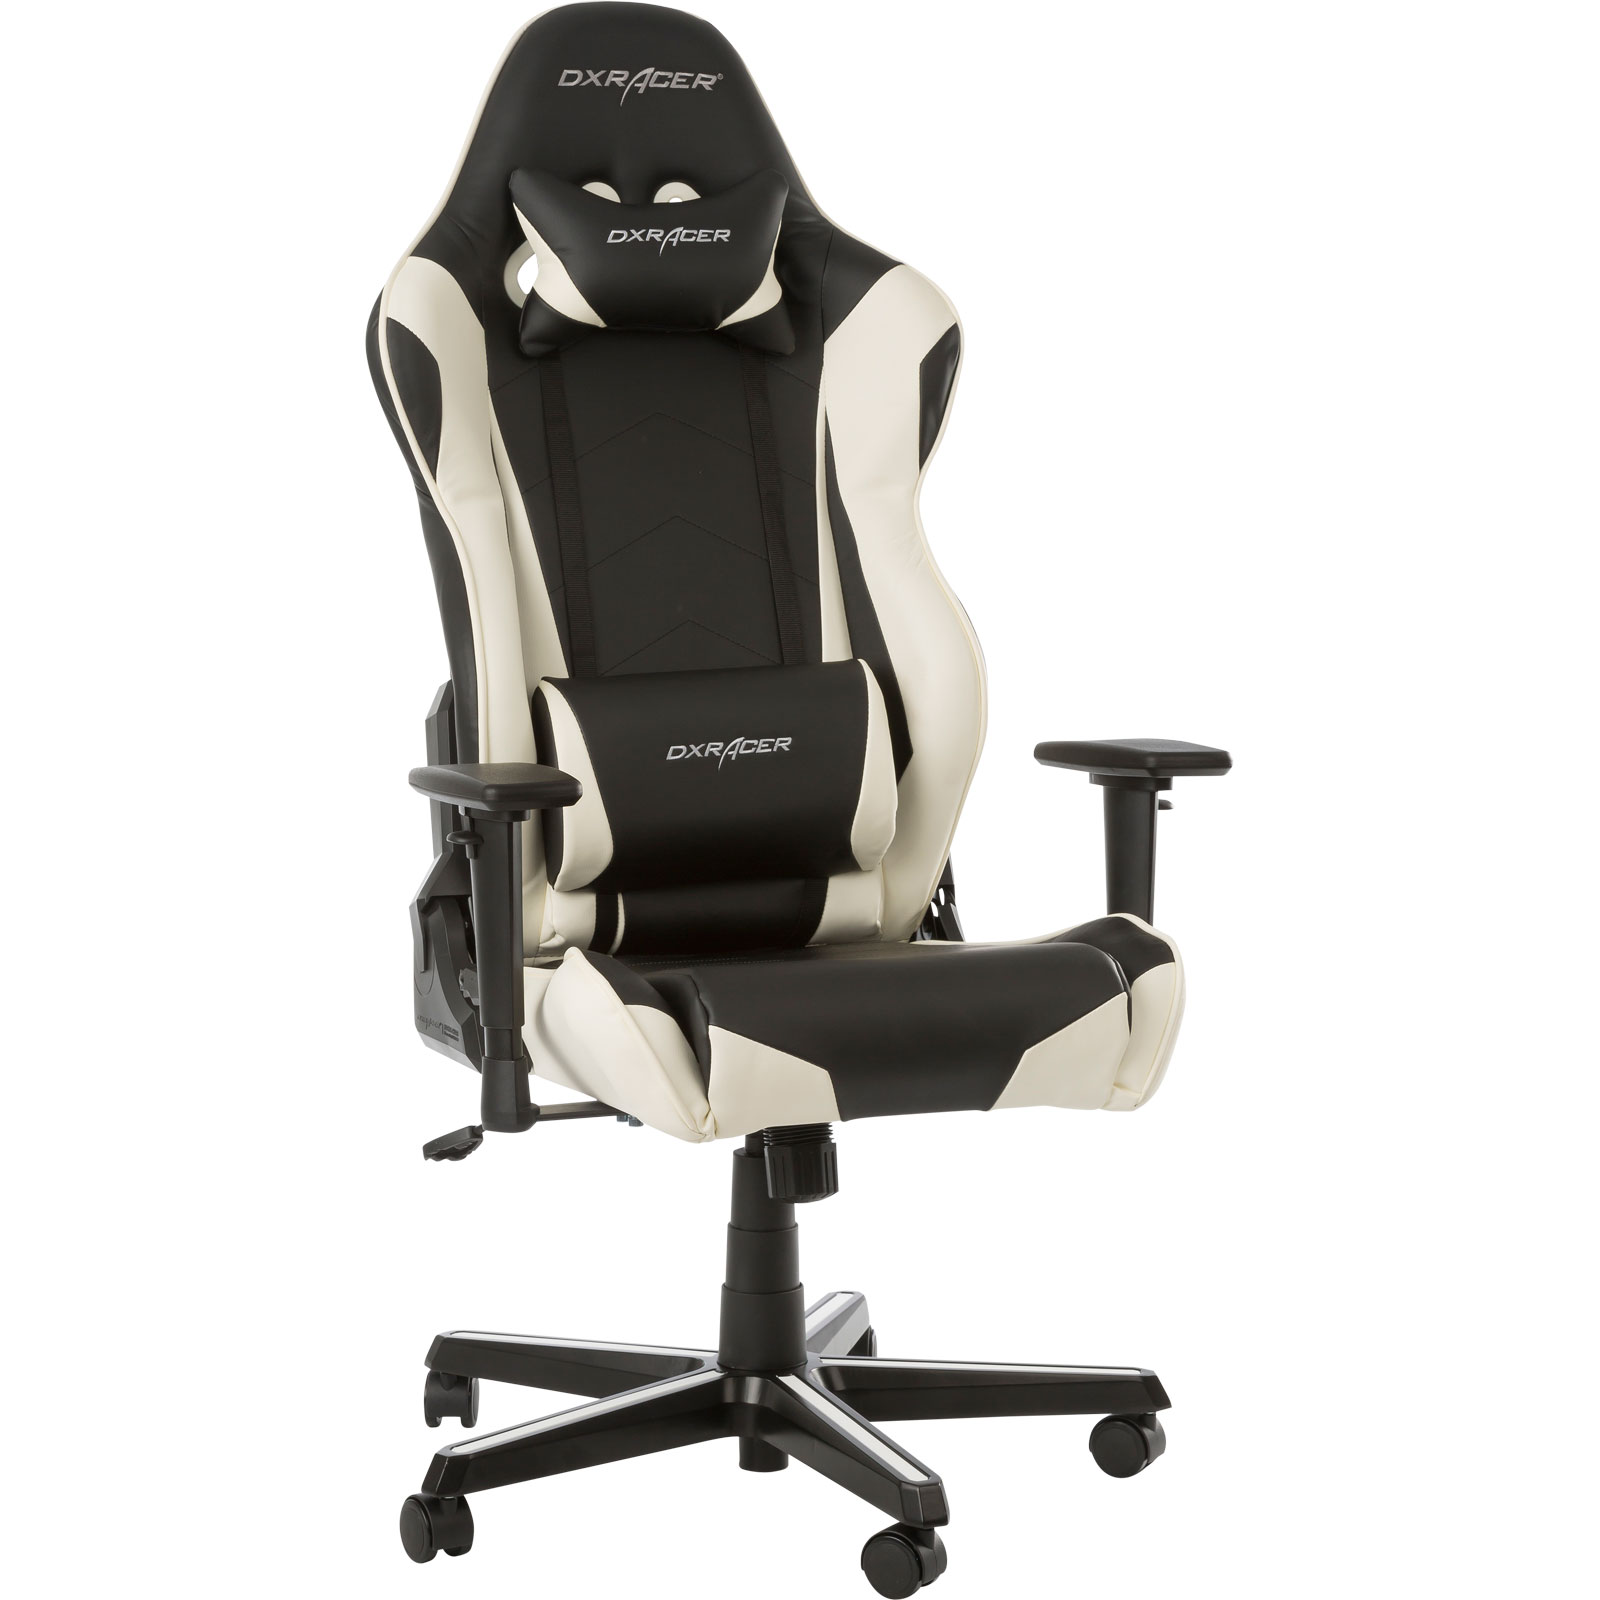 Buy Dxracer Gaming Chair Ergonomic Office Affordable Pc Console Racing Seat For Gamers Formula Series Fd01 Strong Mesh Sgs Certified Gas Lift Medium Black Online In Indonesia B071ldqtb8